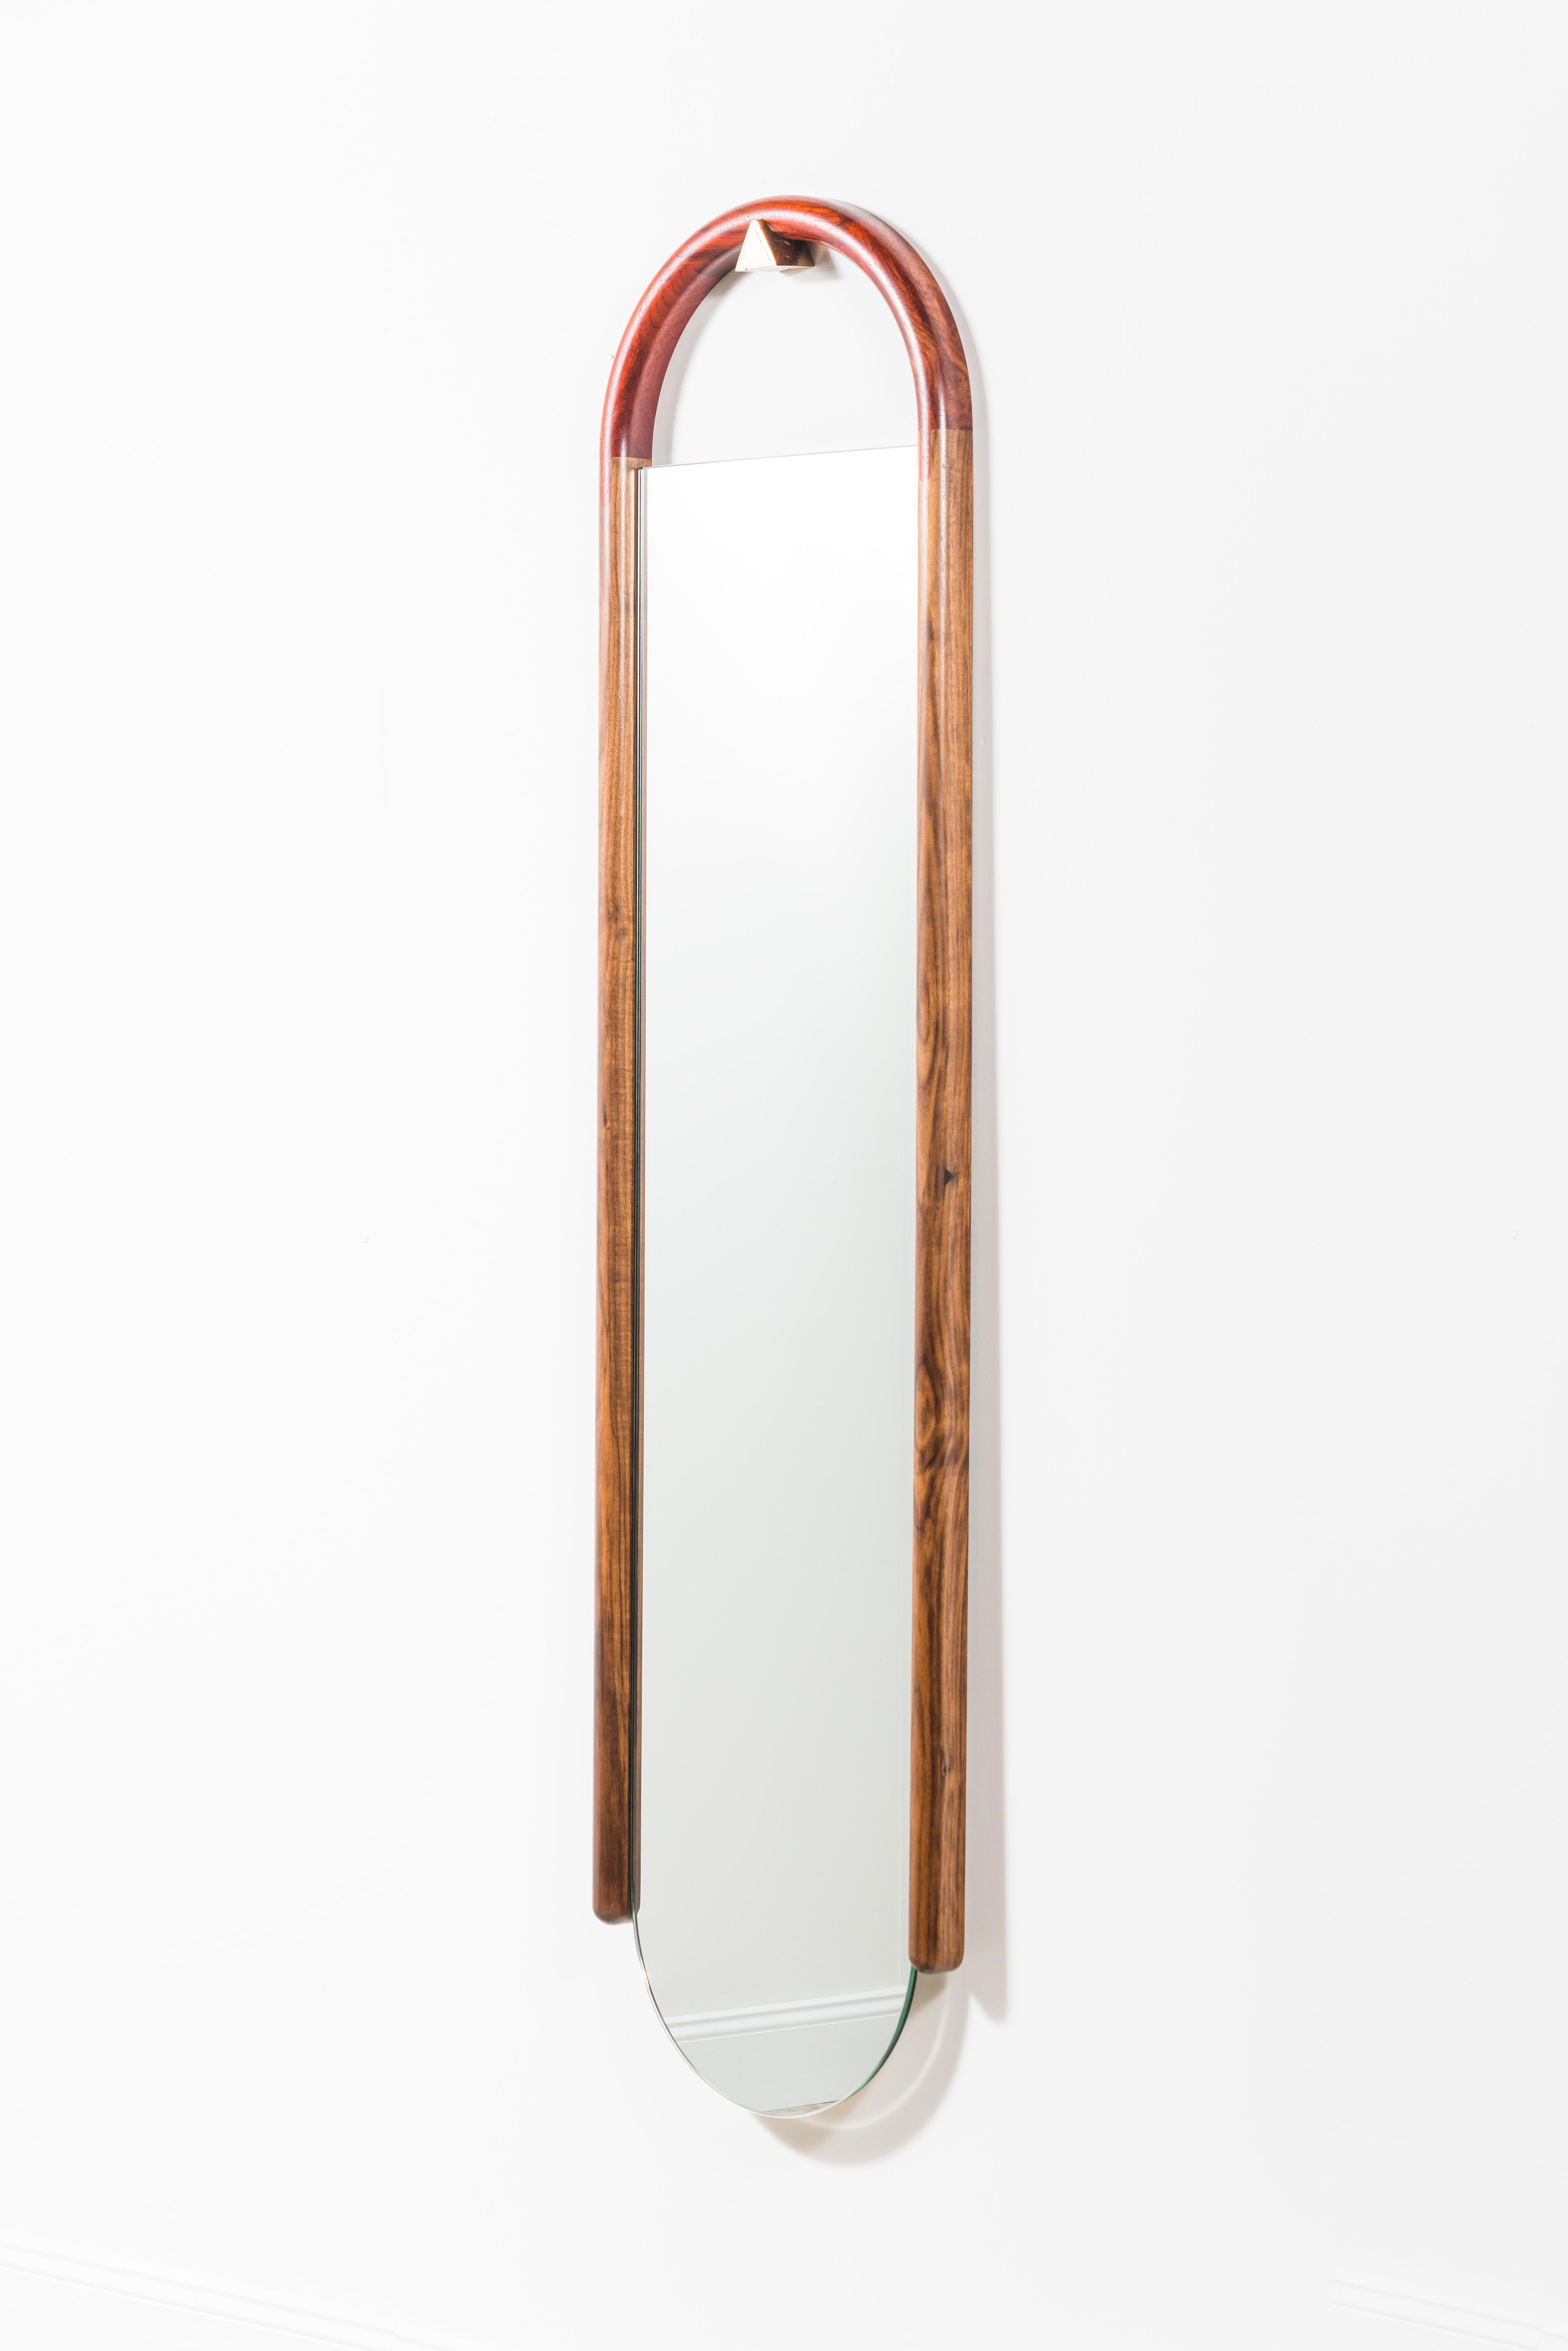 Polished Halo Mirror Wall Mounted Birnam Wood Studio in Cherry and Curly Maple For Sale